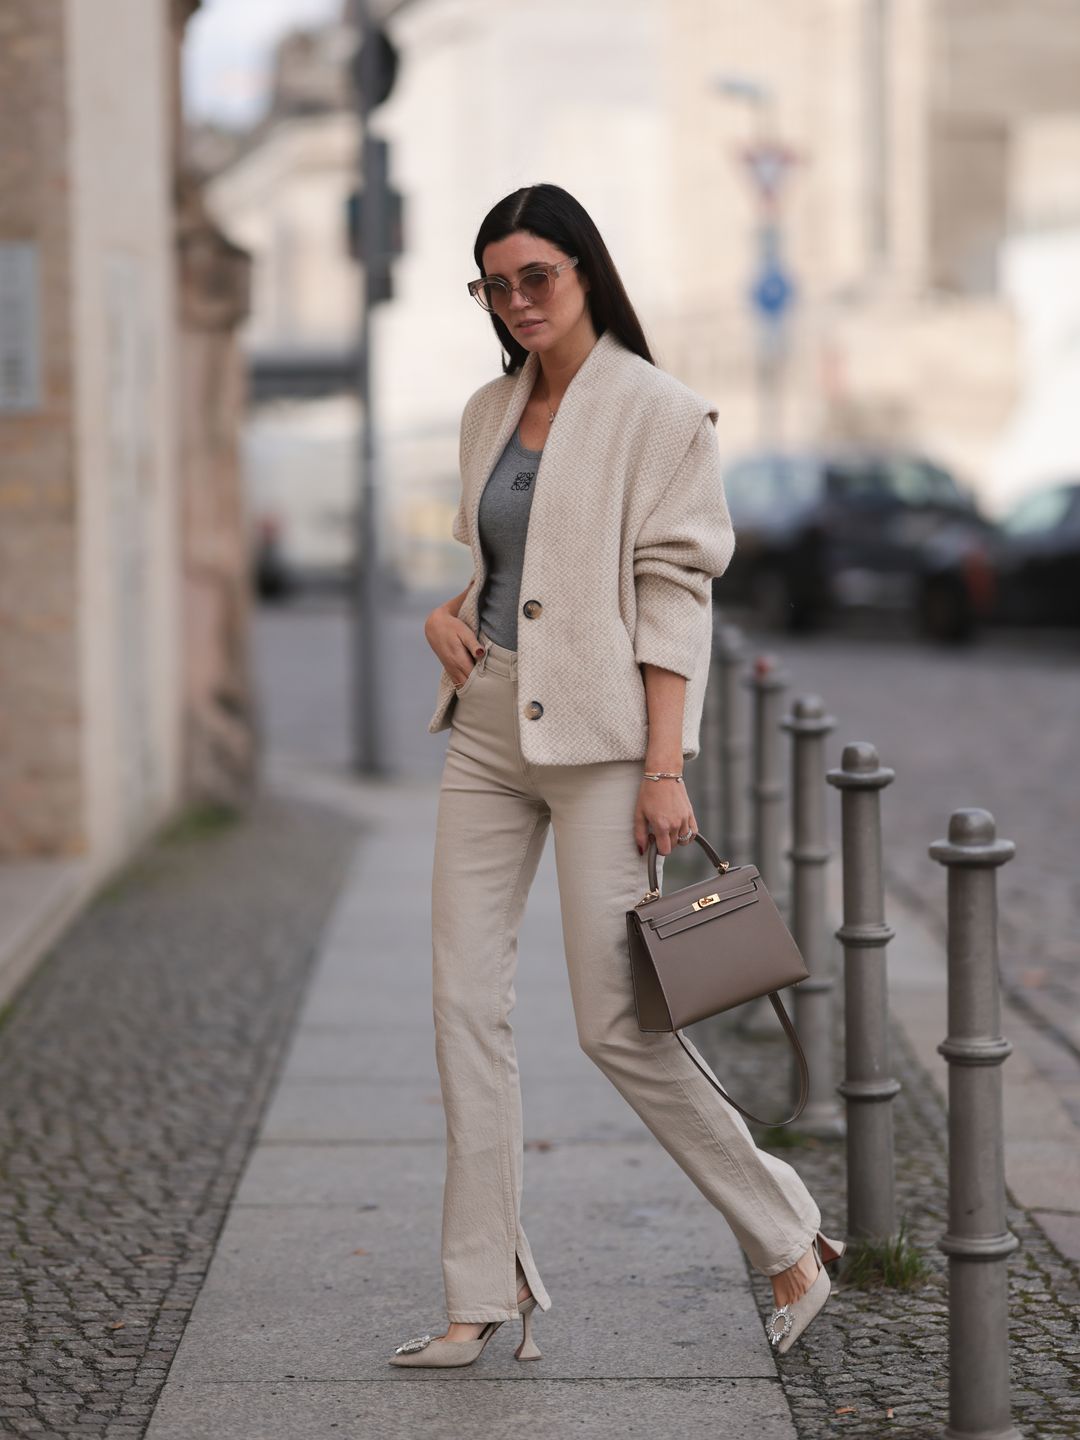 Power dressing: 7 easy ways to nail the trend - from sharp blazers